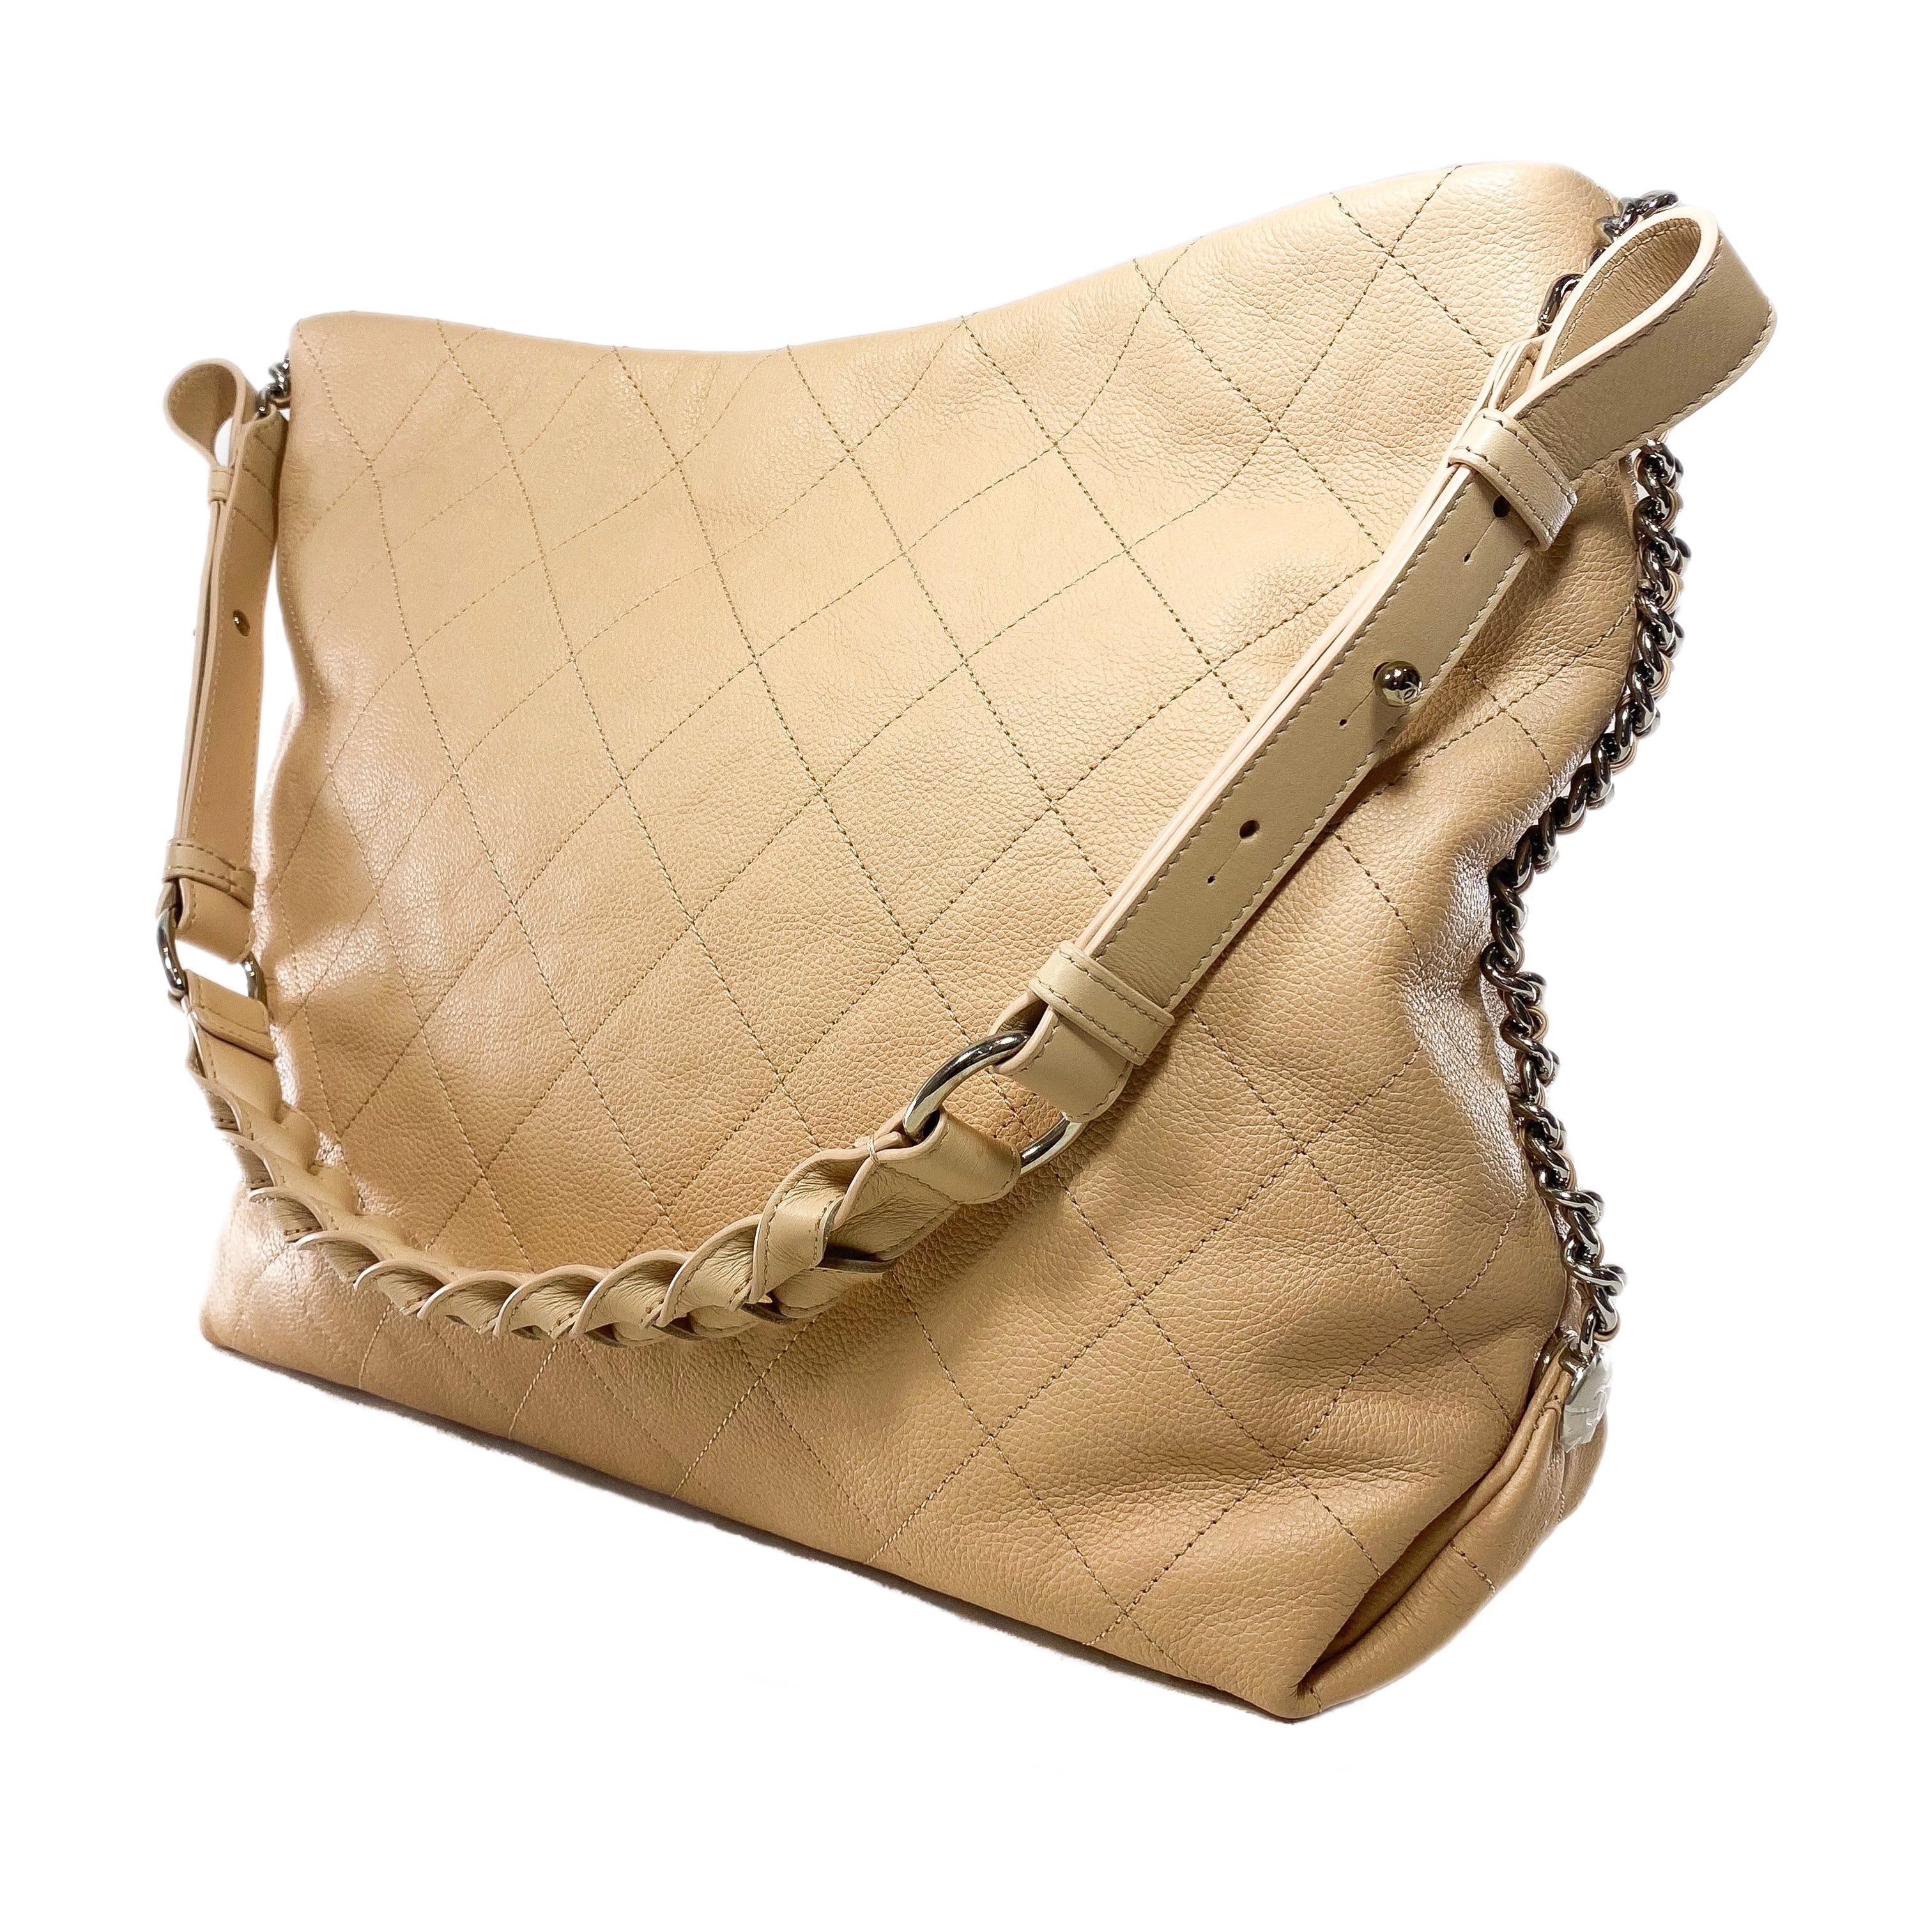 Chanel Beige Braided With Style Large Hobo Bag